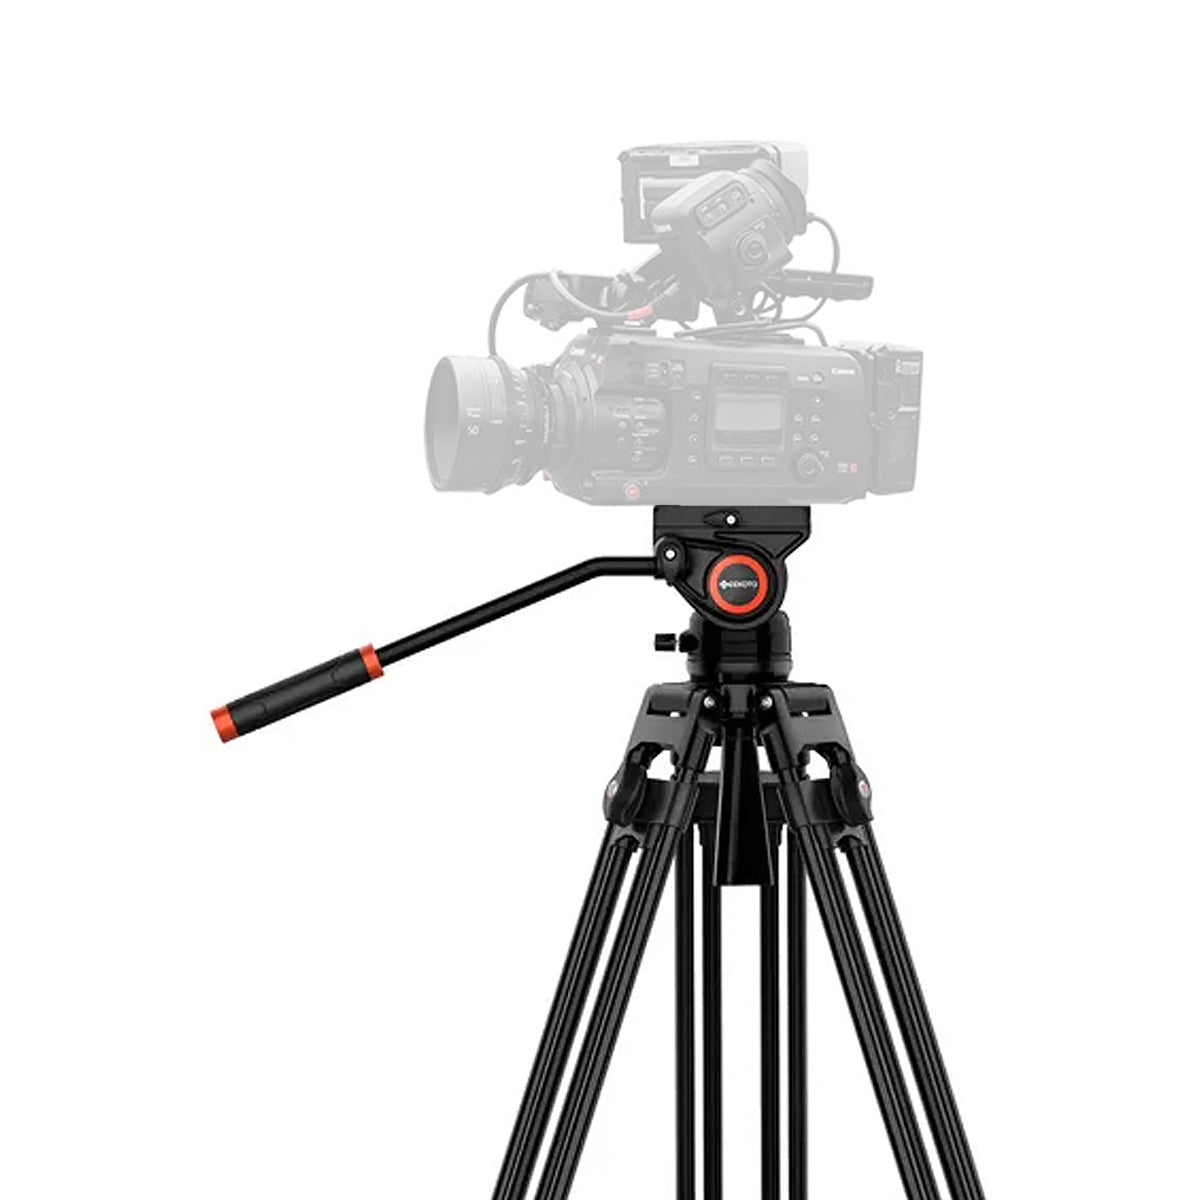 Triopo DV-965 Professional Video Camera Tripod with 15kg Load Capacity, 360 Degree Panoramic Shooting, Multiple Mode Switching for Film & Television